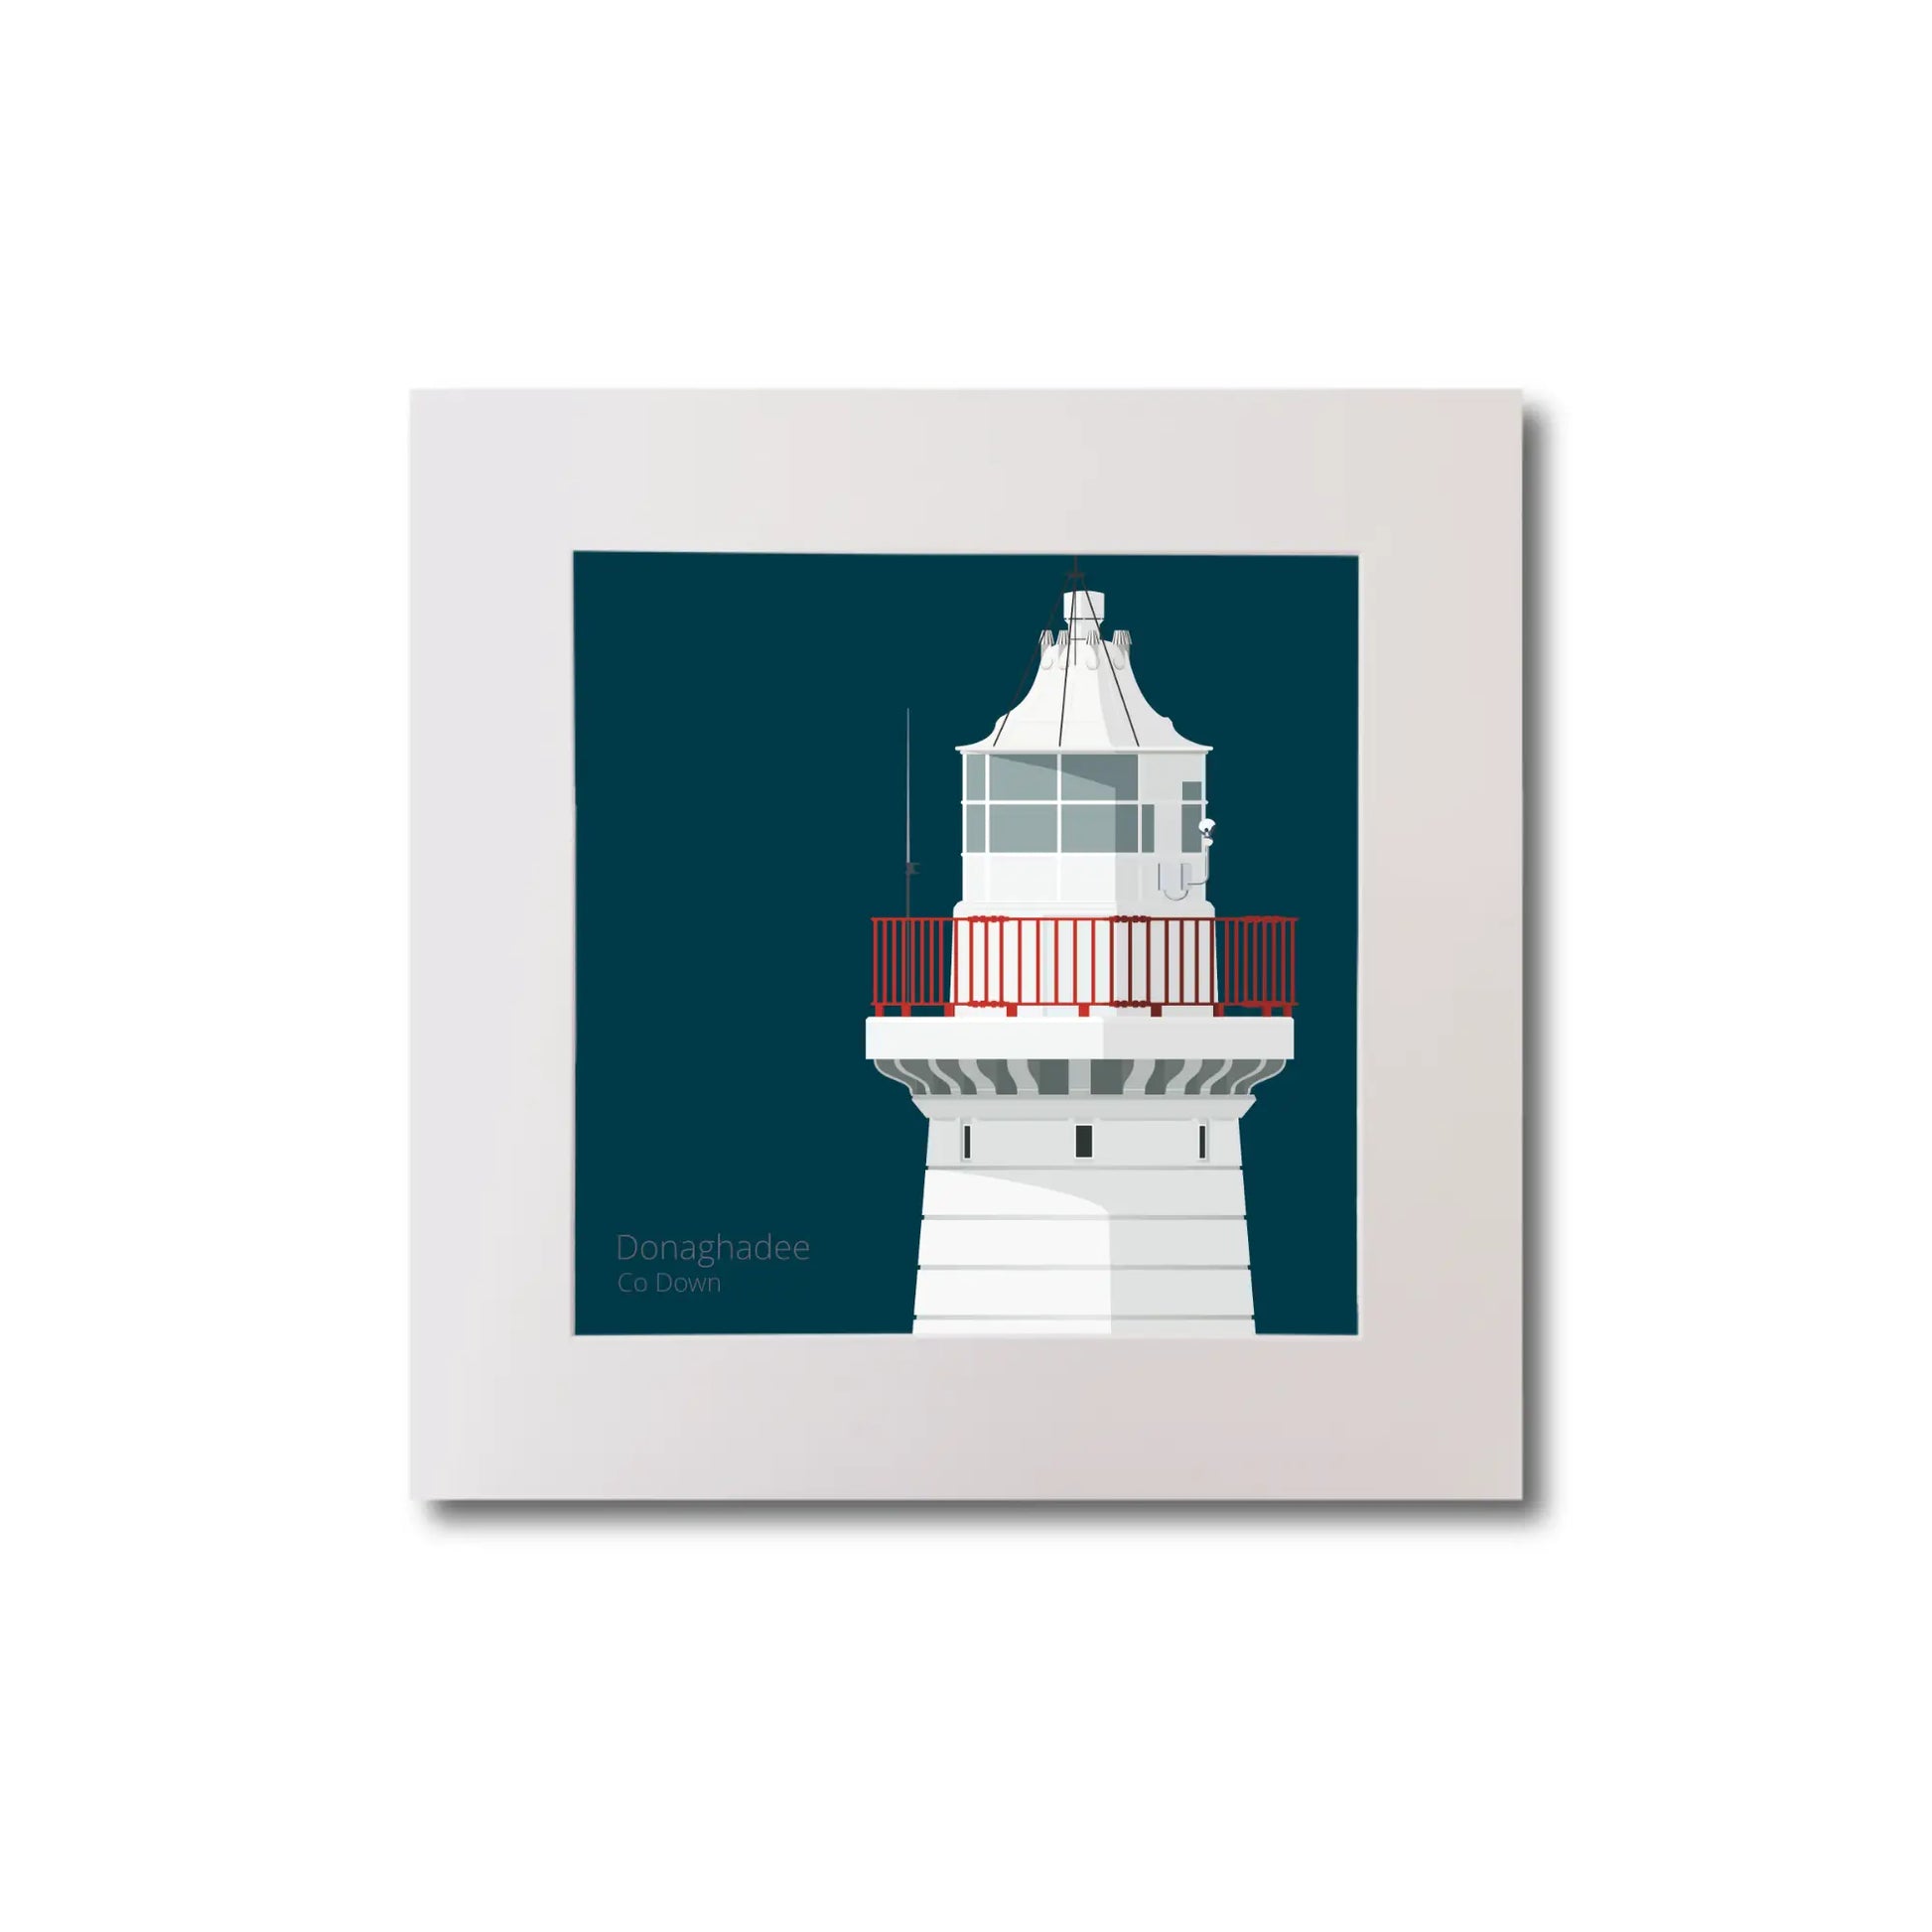 Illustration of Donaghadee lighthouse on a midnight blue background, mounted and measuring 20x20cm.